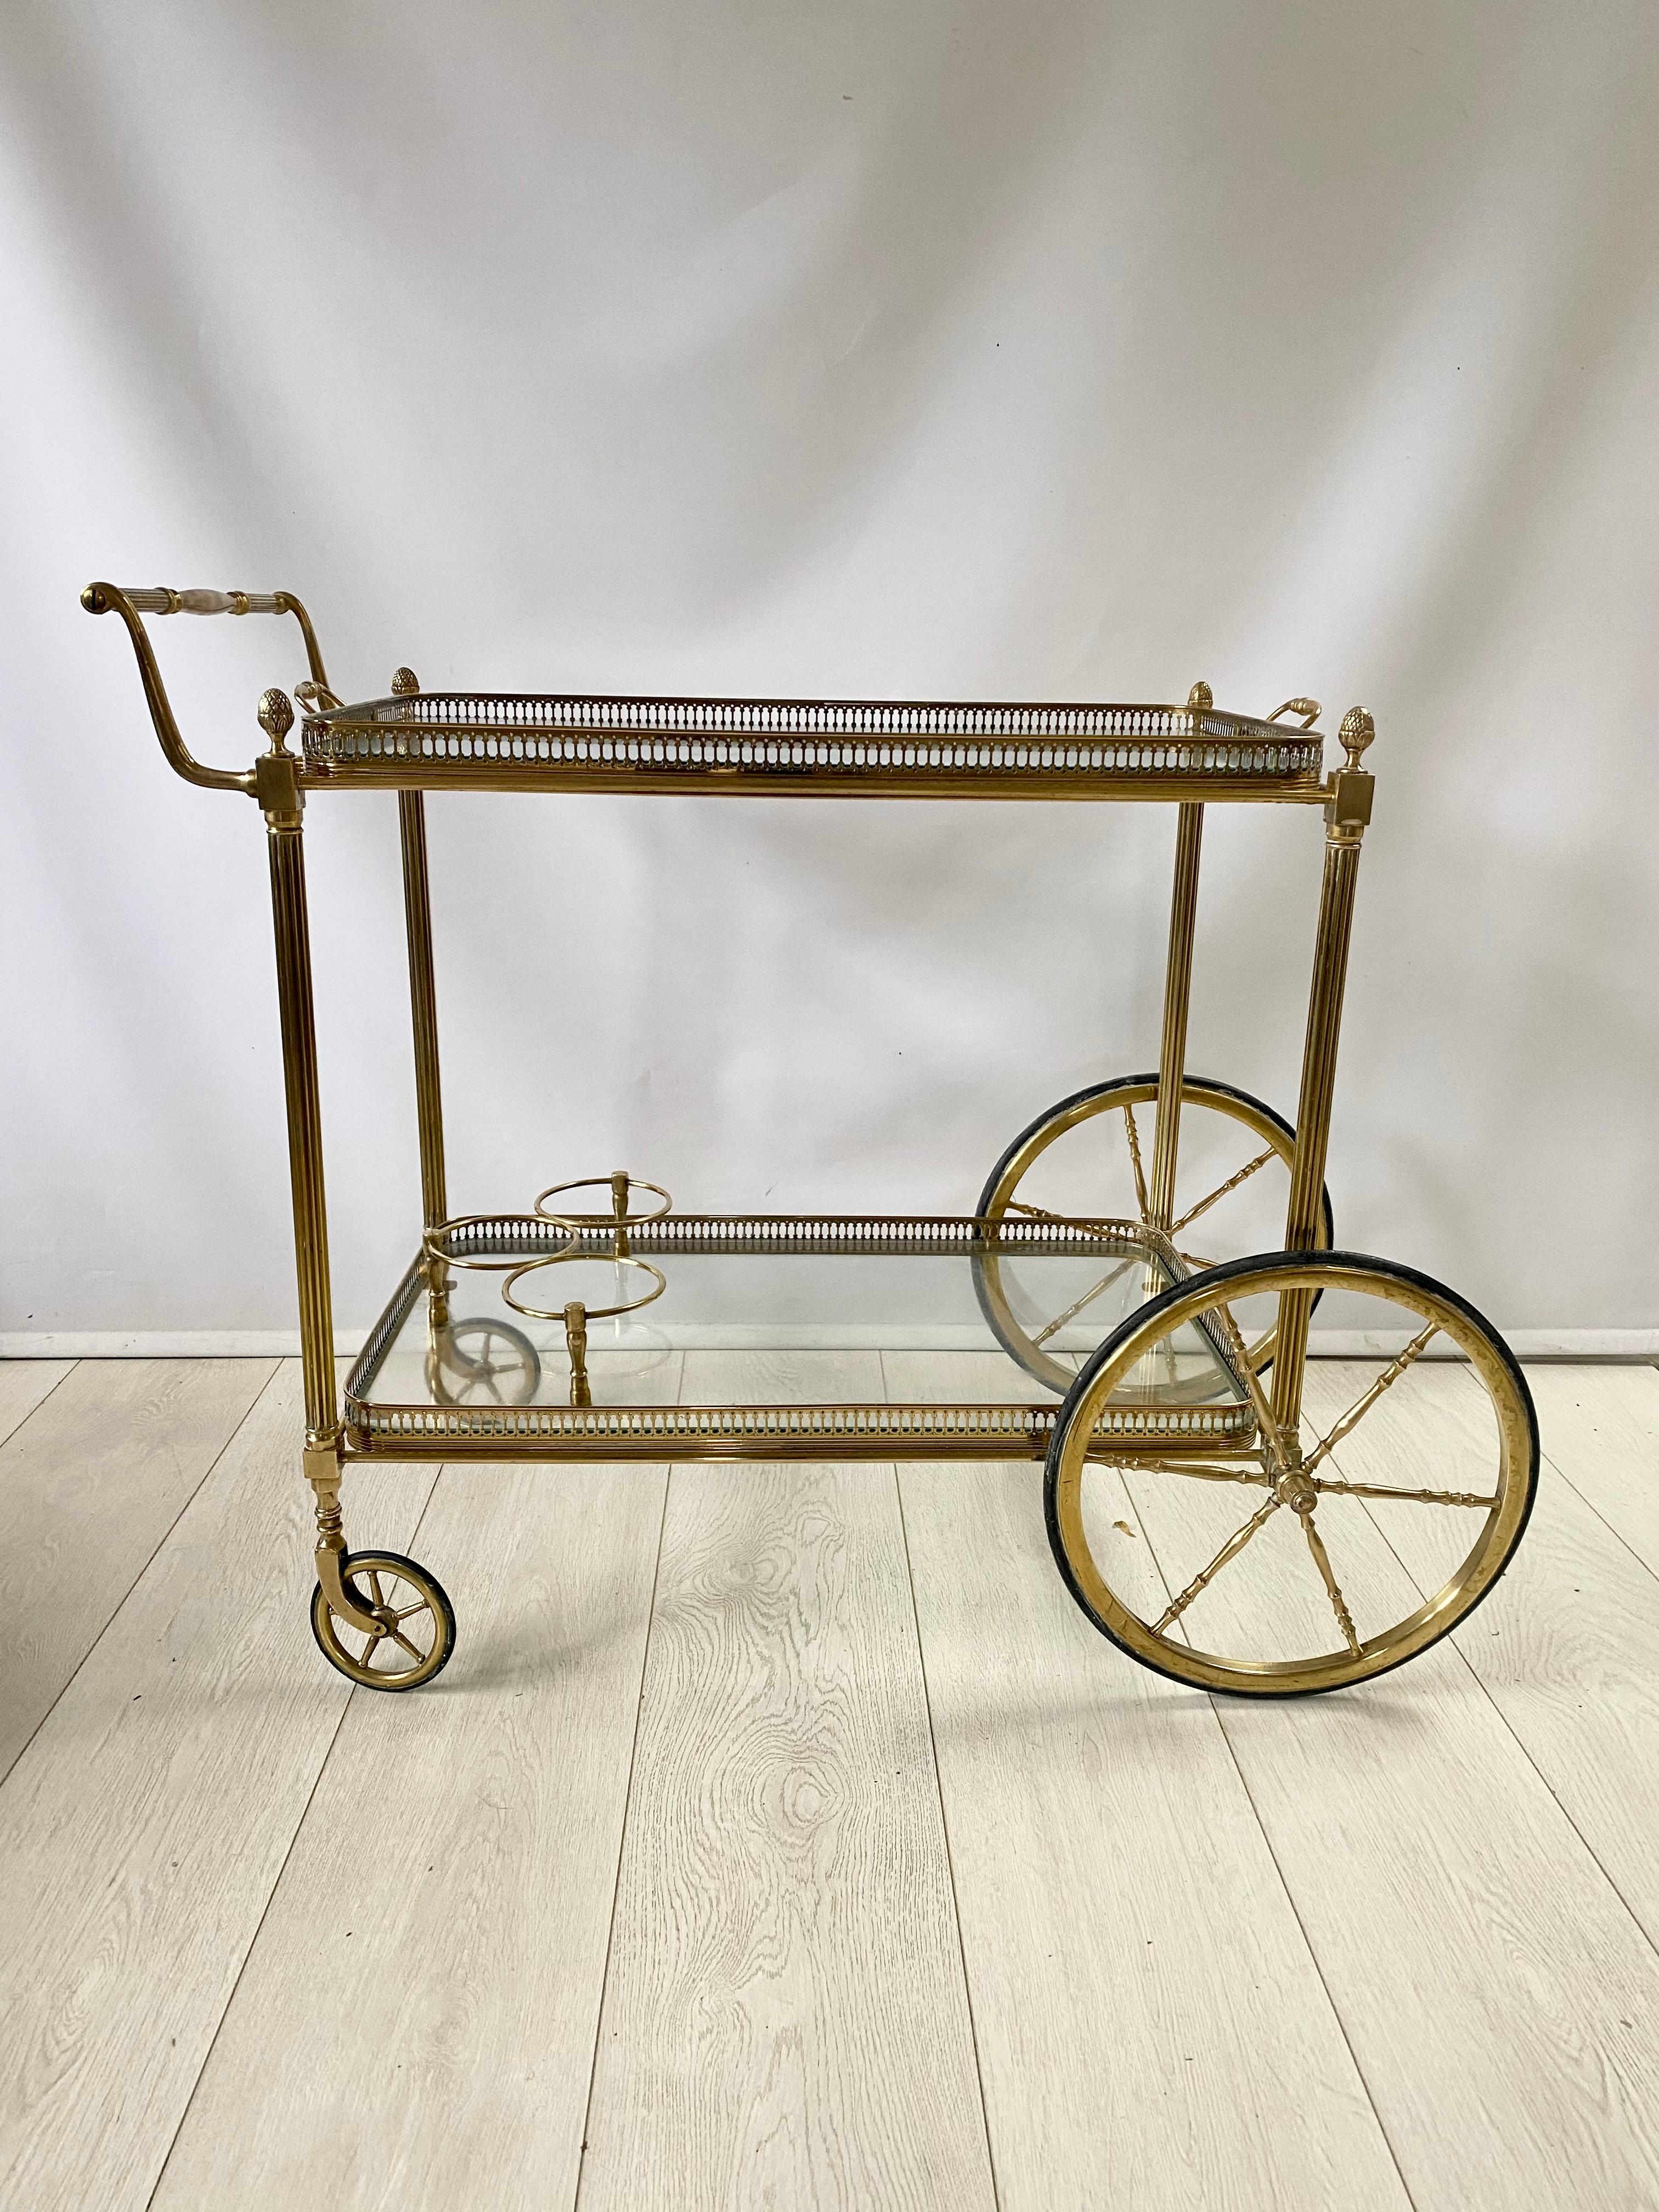 Classic Vintage French Brass Drinks Trolley Bar Cart In Good Condition For Sale In Crawley Down, GB